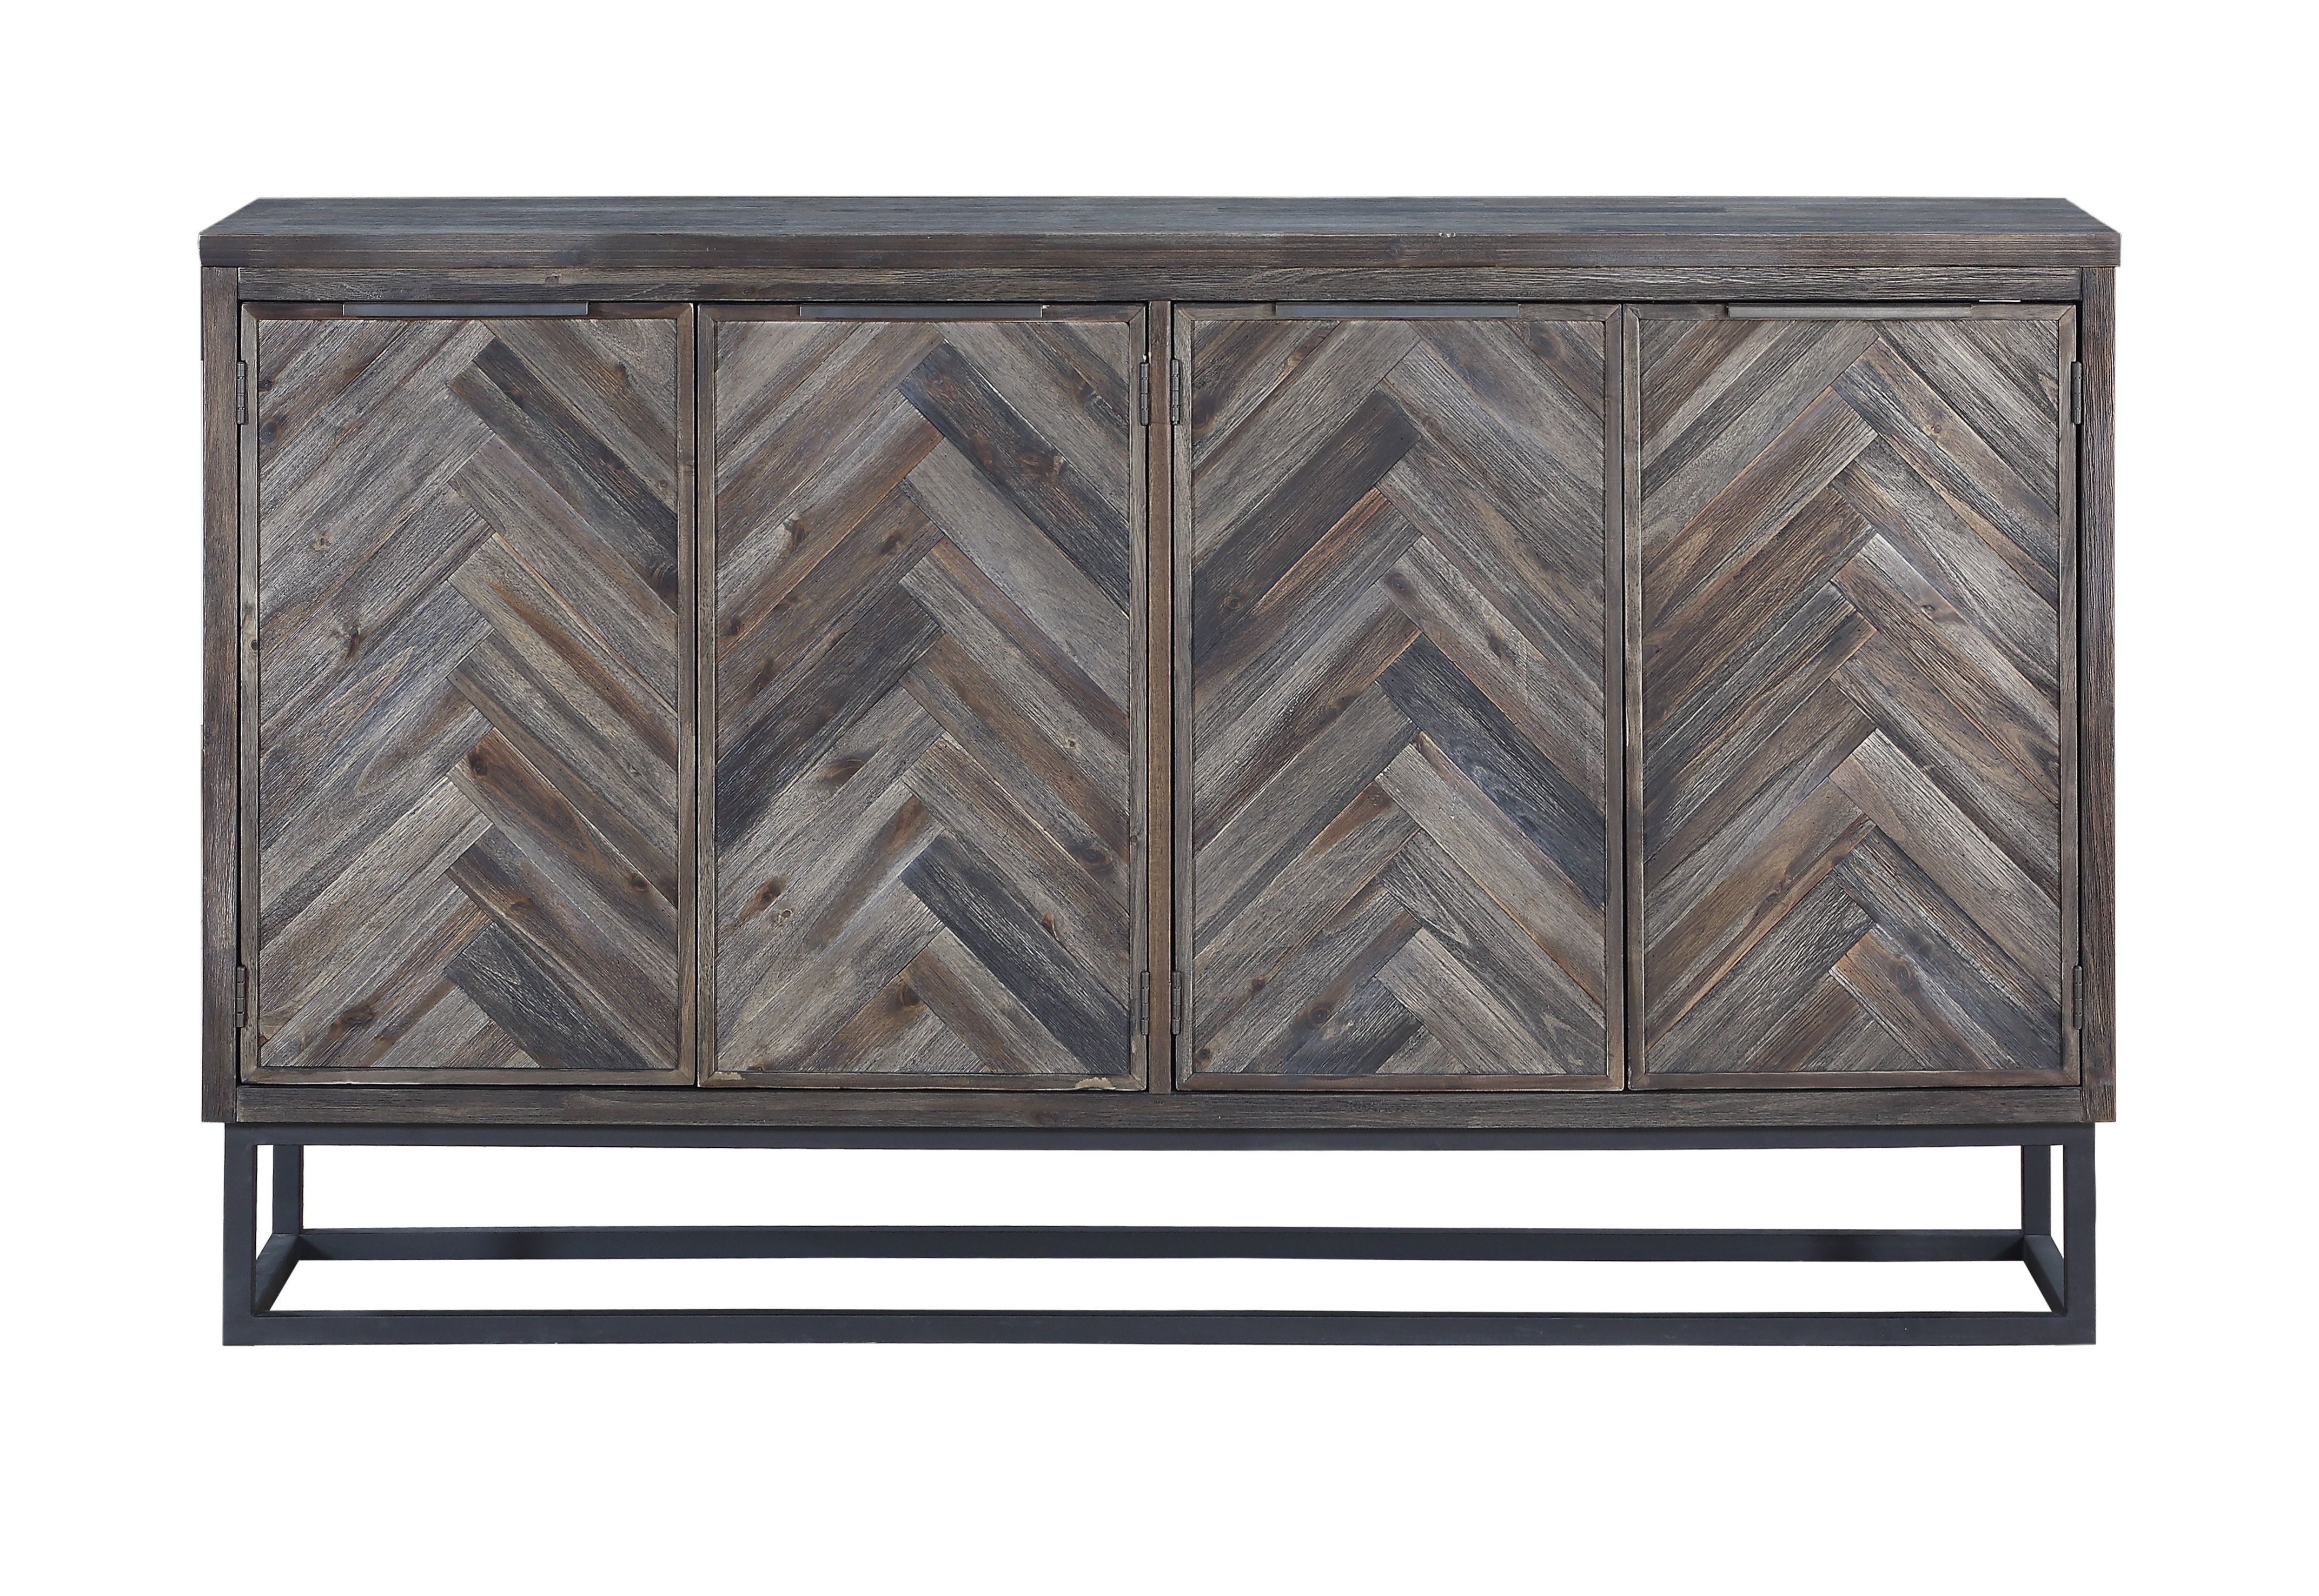 Modern & Contemporary Deny Credenza | Allmodern Intended For Current Errol Media Credenzas (View 7 of 20)